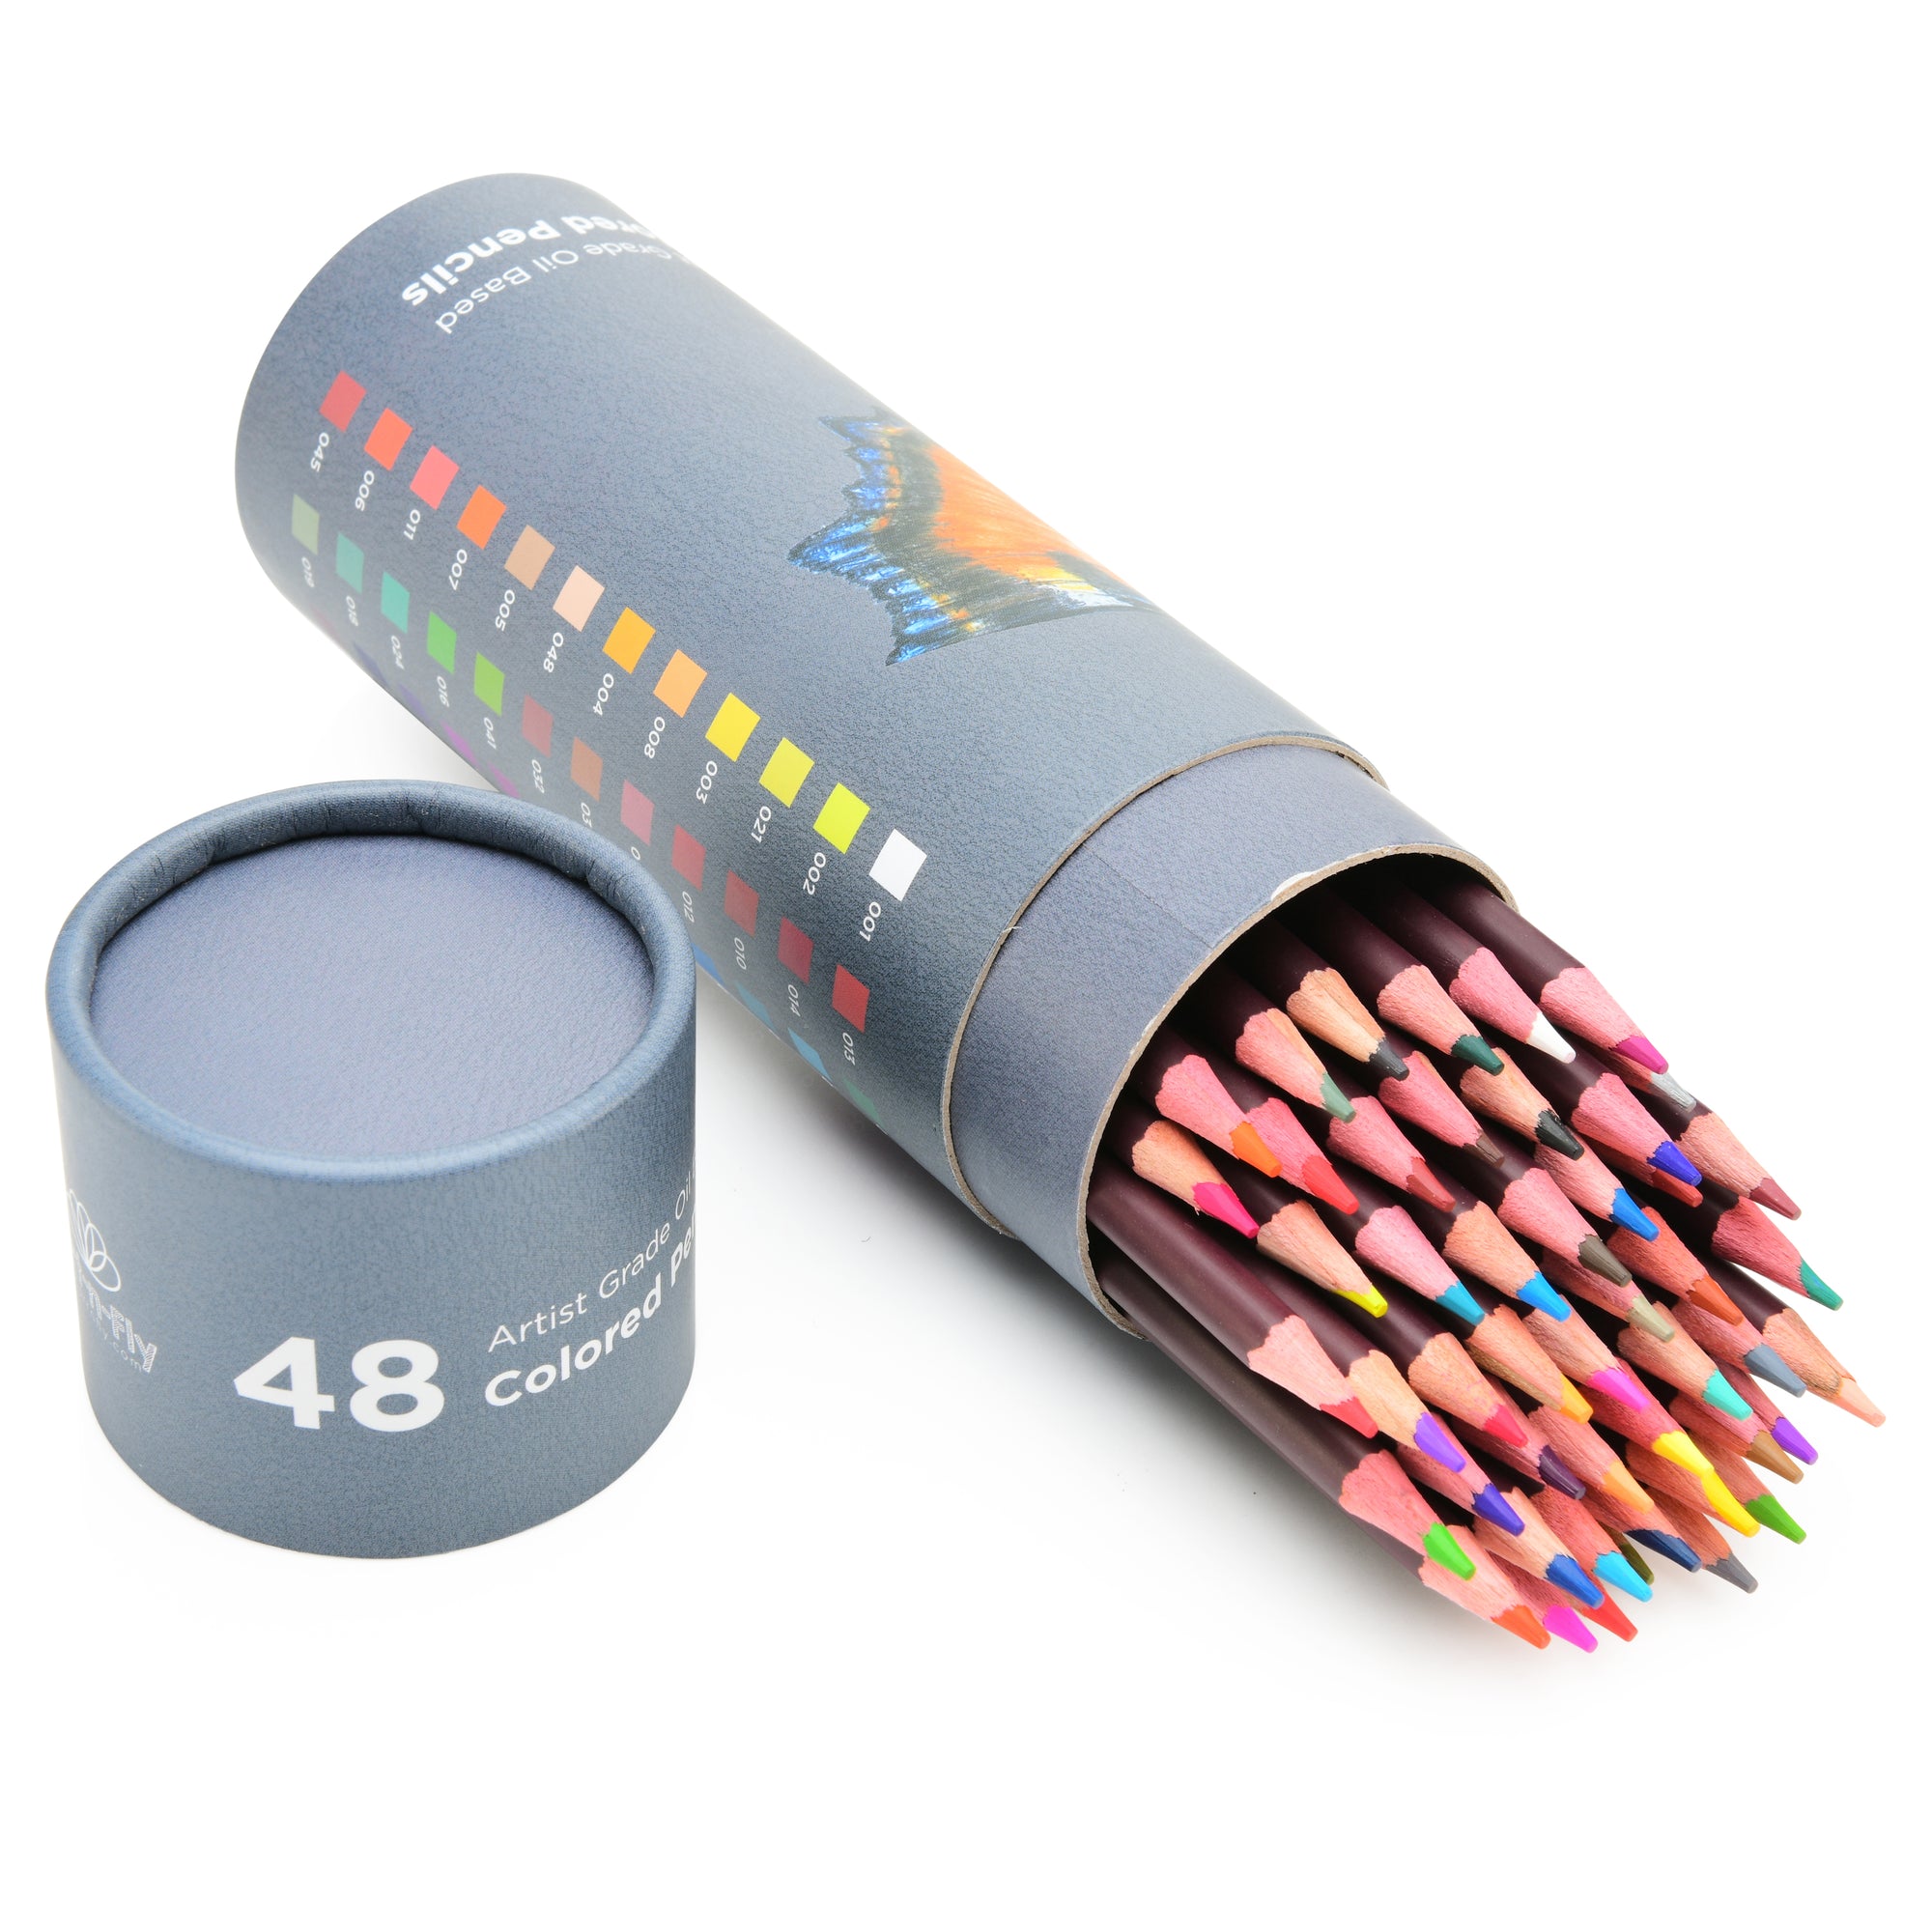 48 Colored Pencils / Artist Quality by Create Your Own